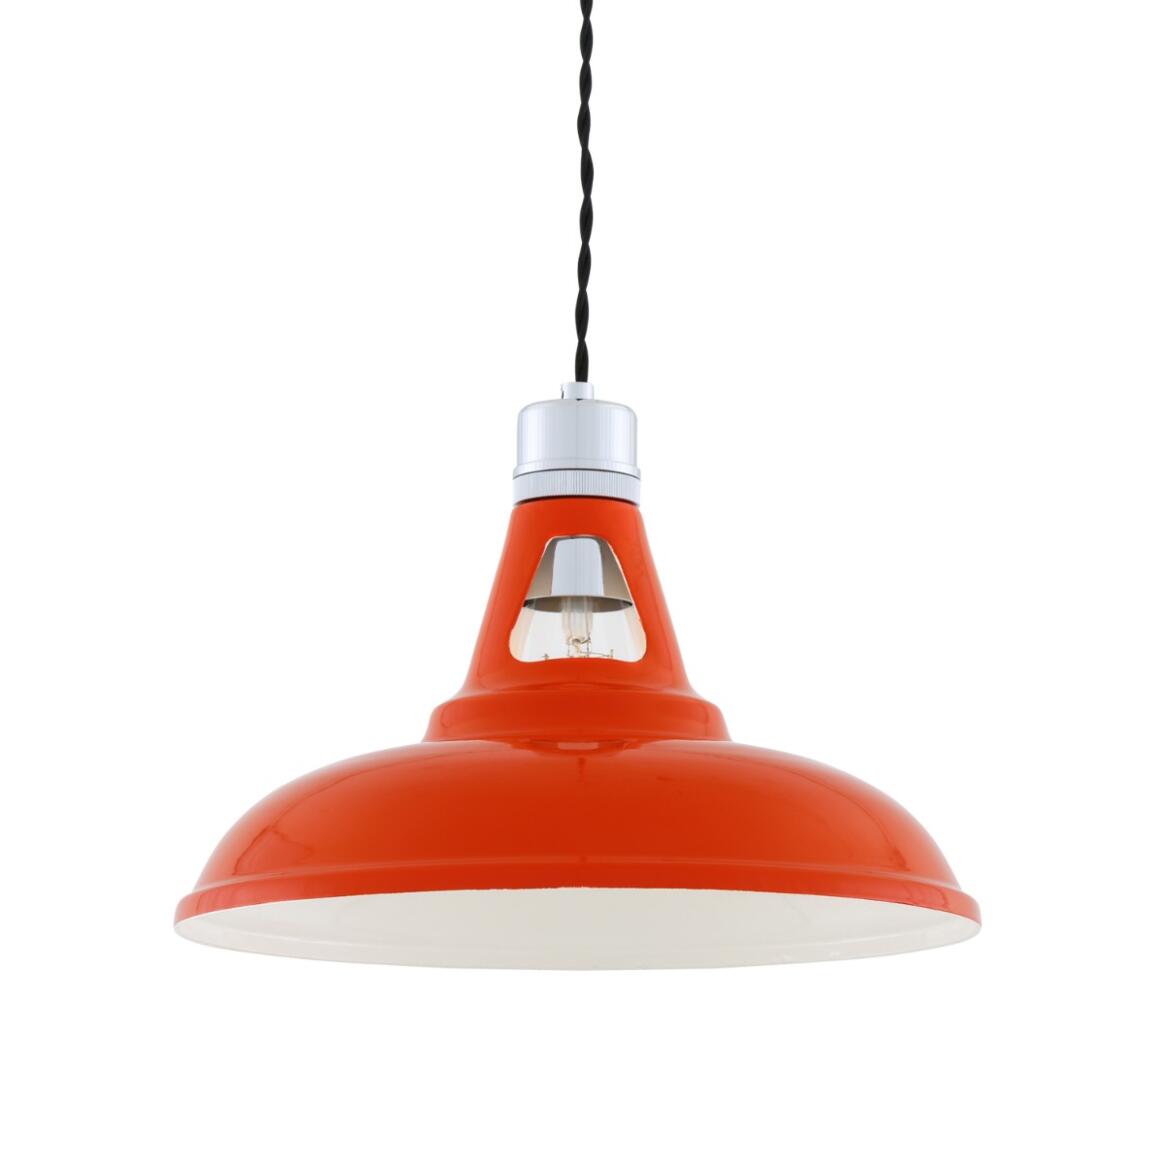 Vienna Industrial Factory Pendant Light 12.2" main product image